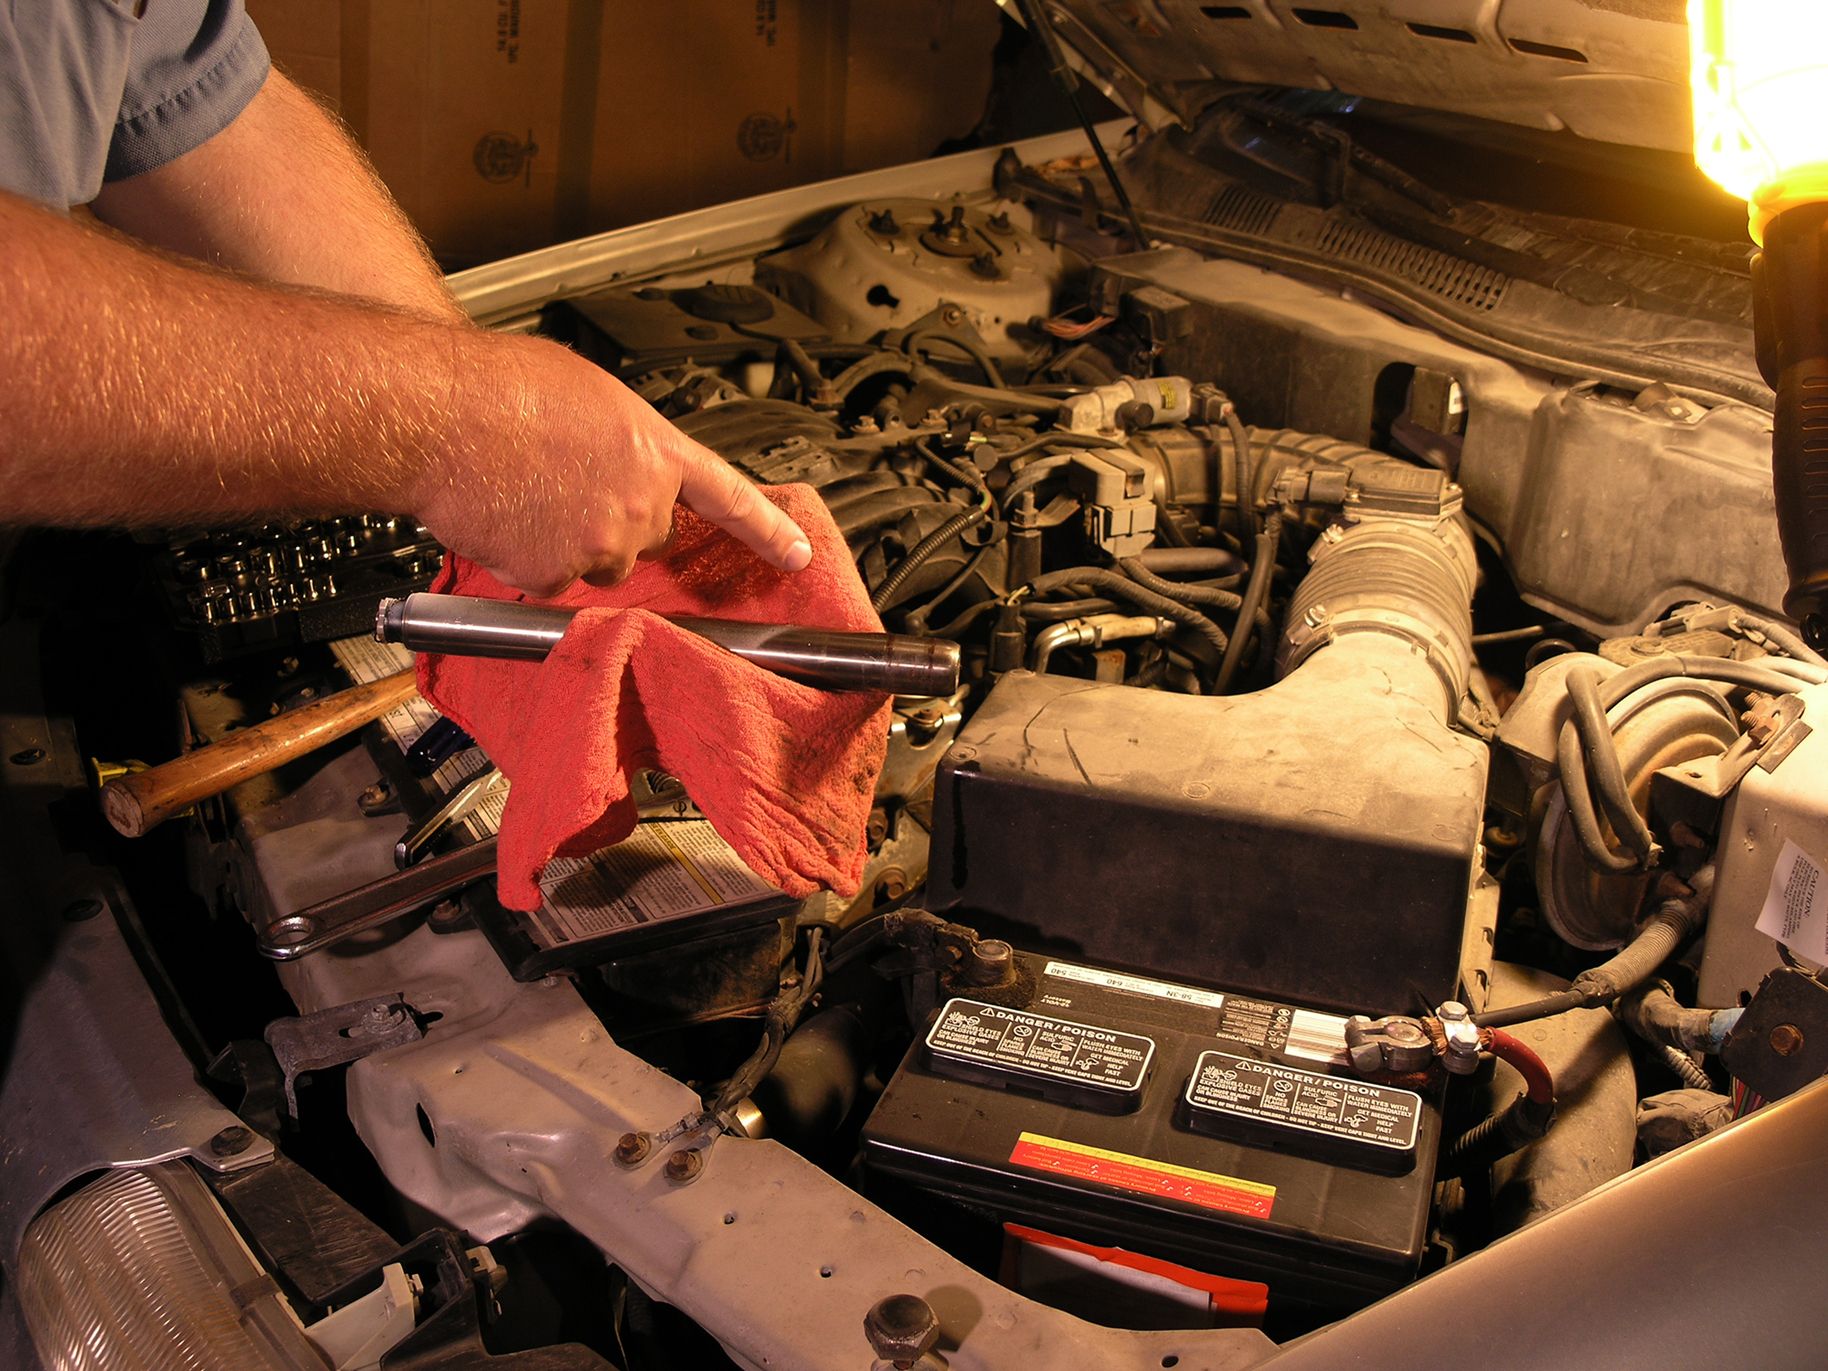 Understanding vehicle recalls and what you need to know to keep your car safe. Photo is of a car engine, the hood is up and someone is holding a red towel and a mechanics tool above the engine, looking like they are working on it.